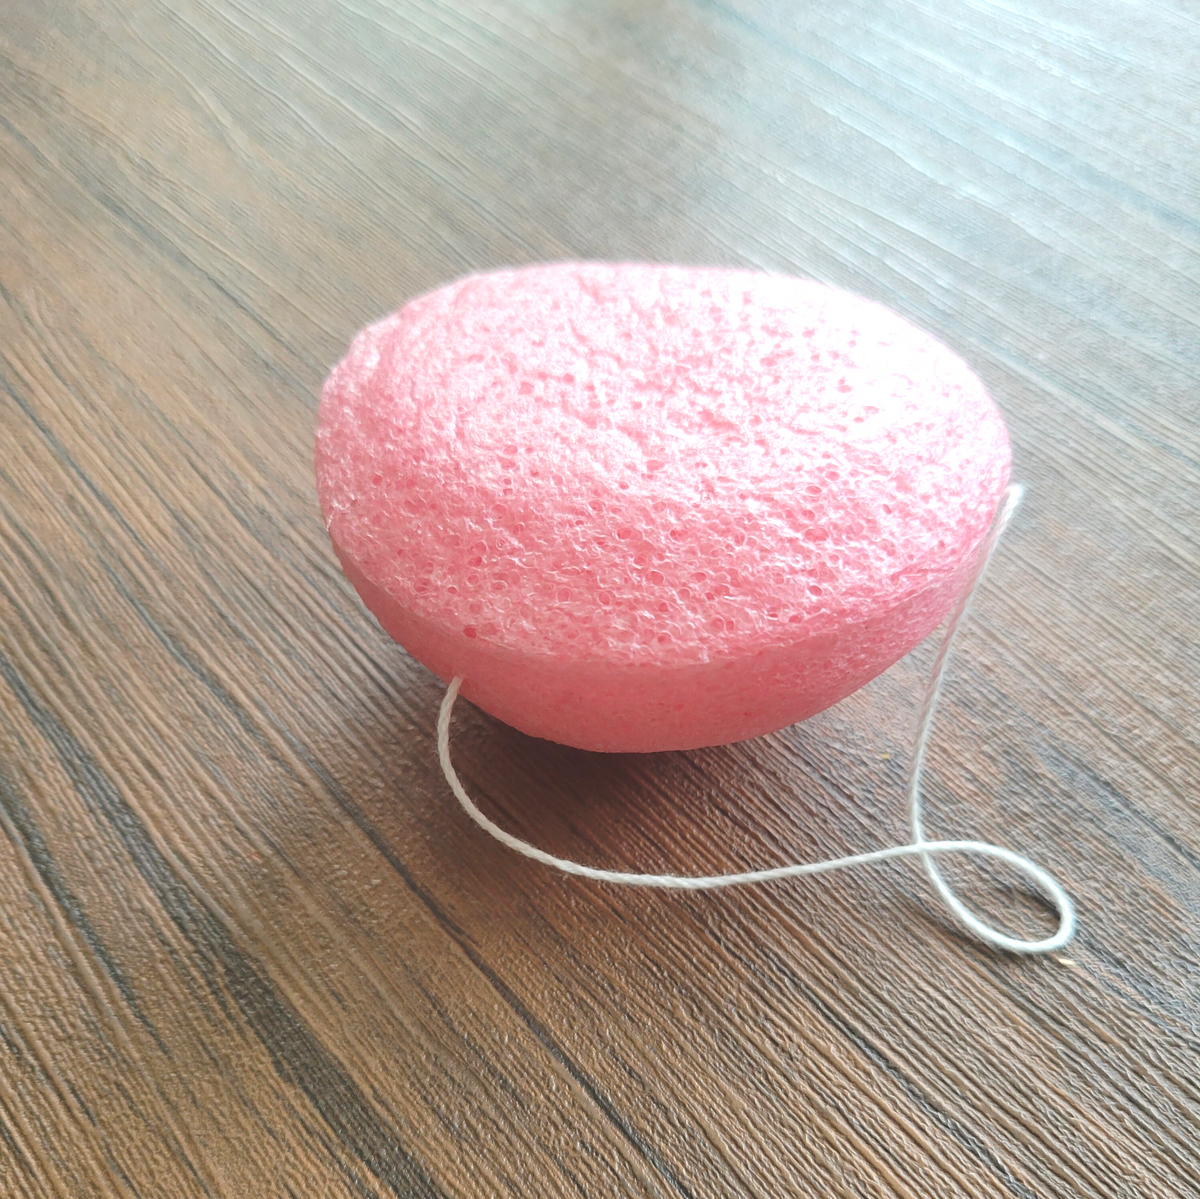 Pink konjac sponge best used when applying facial moisturizer by Umber. Promotes smoothe skin and reduced dark spots/hyperpigmentation